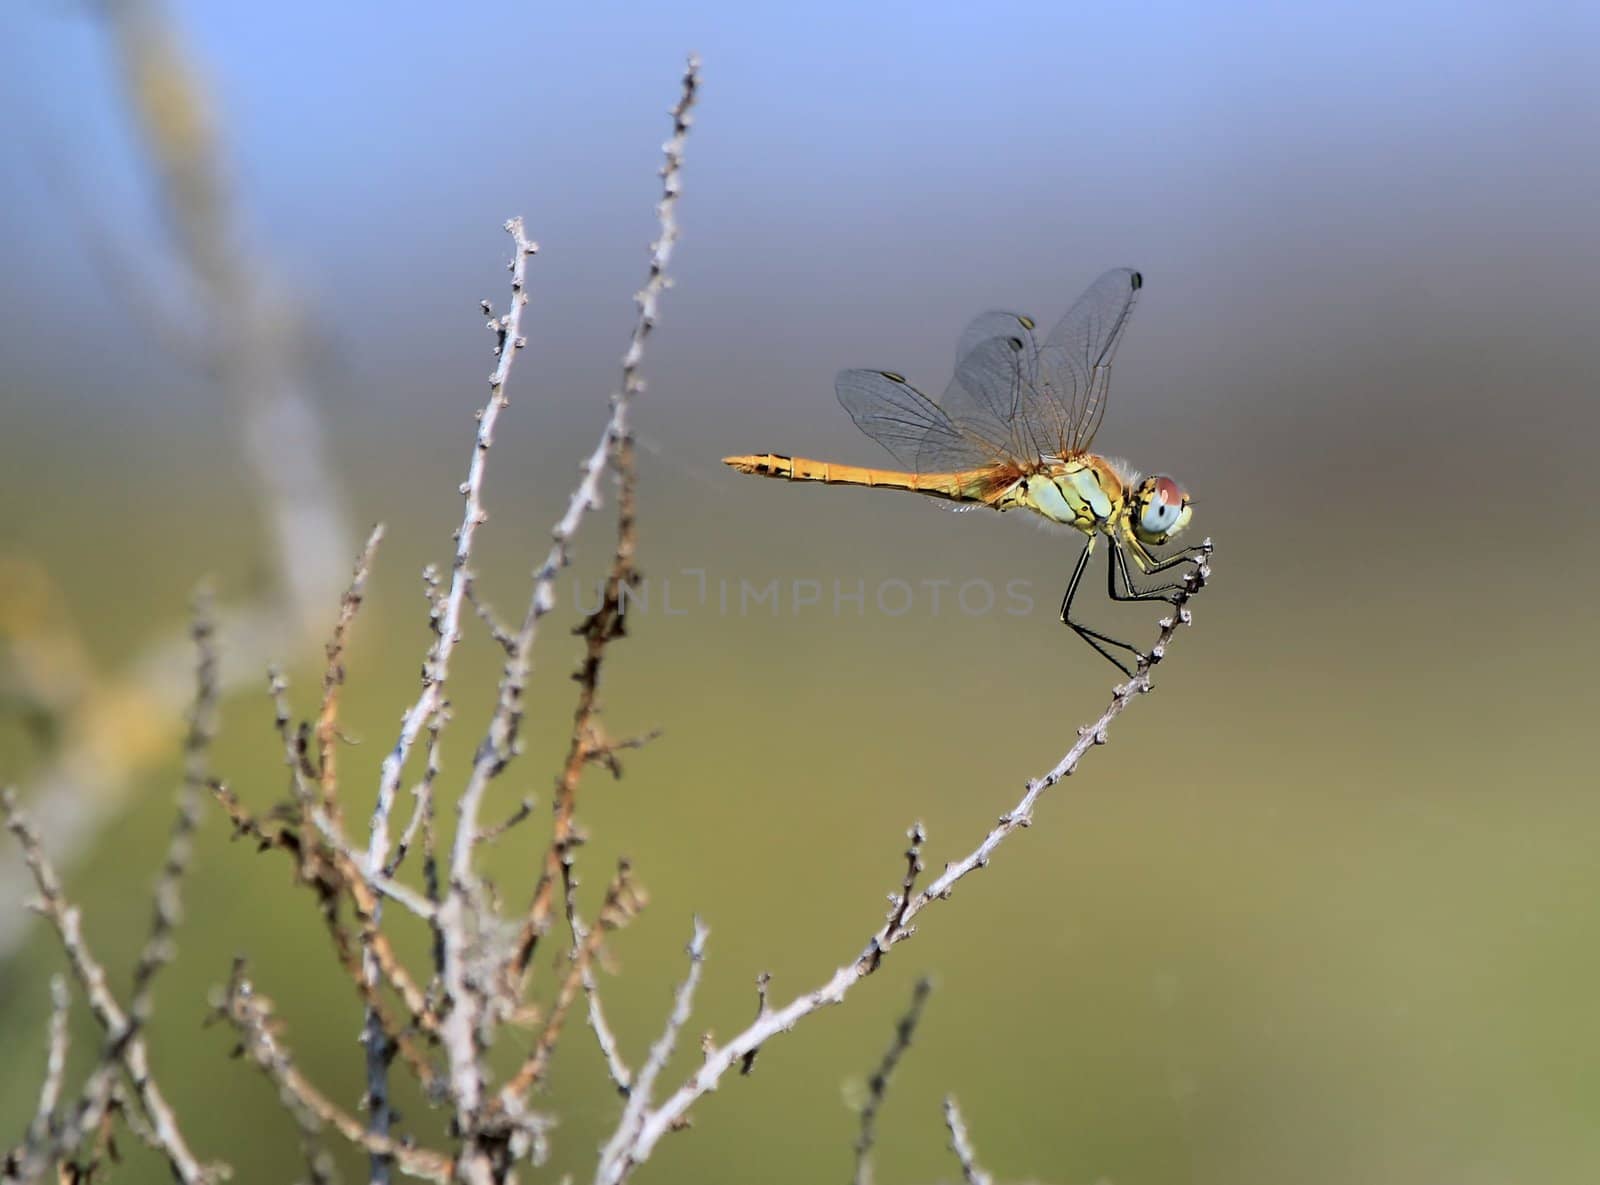 Colorful big dragonfly on a little branch in the nature in Camargue, France